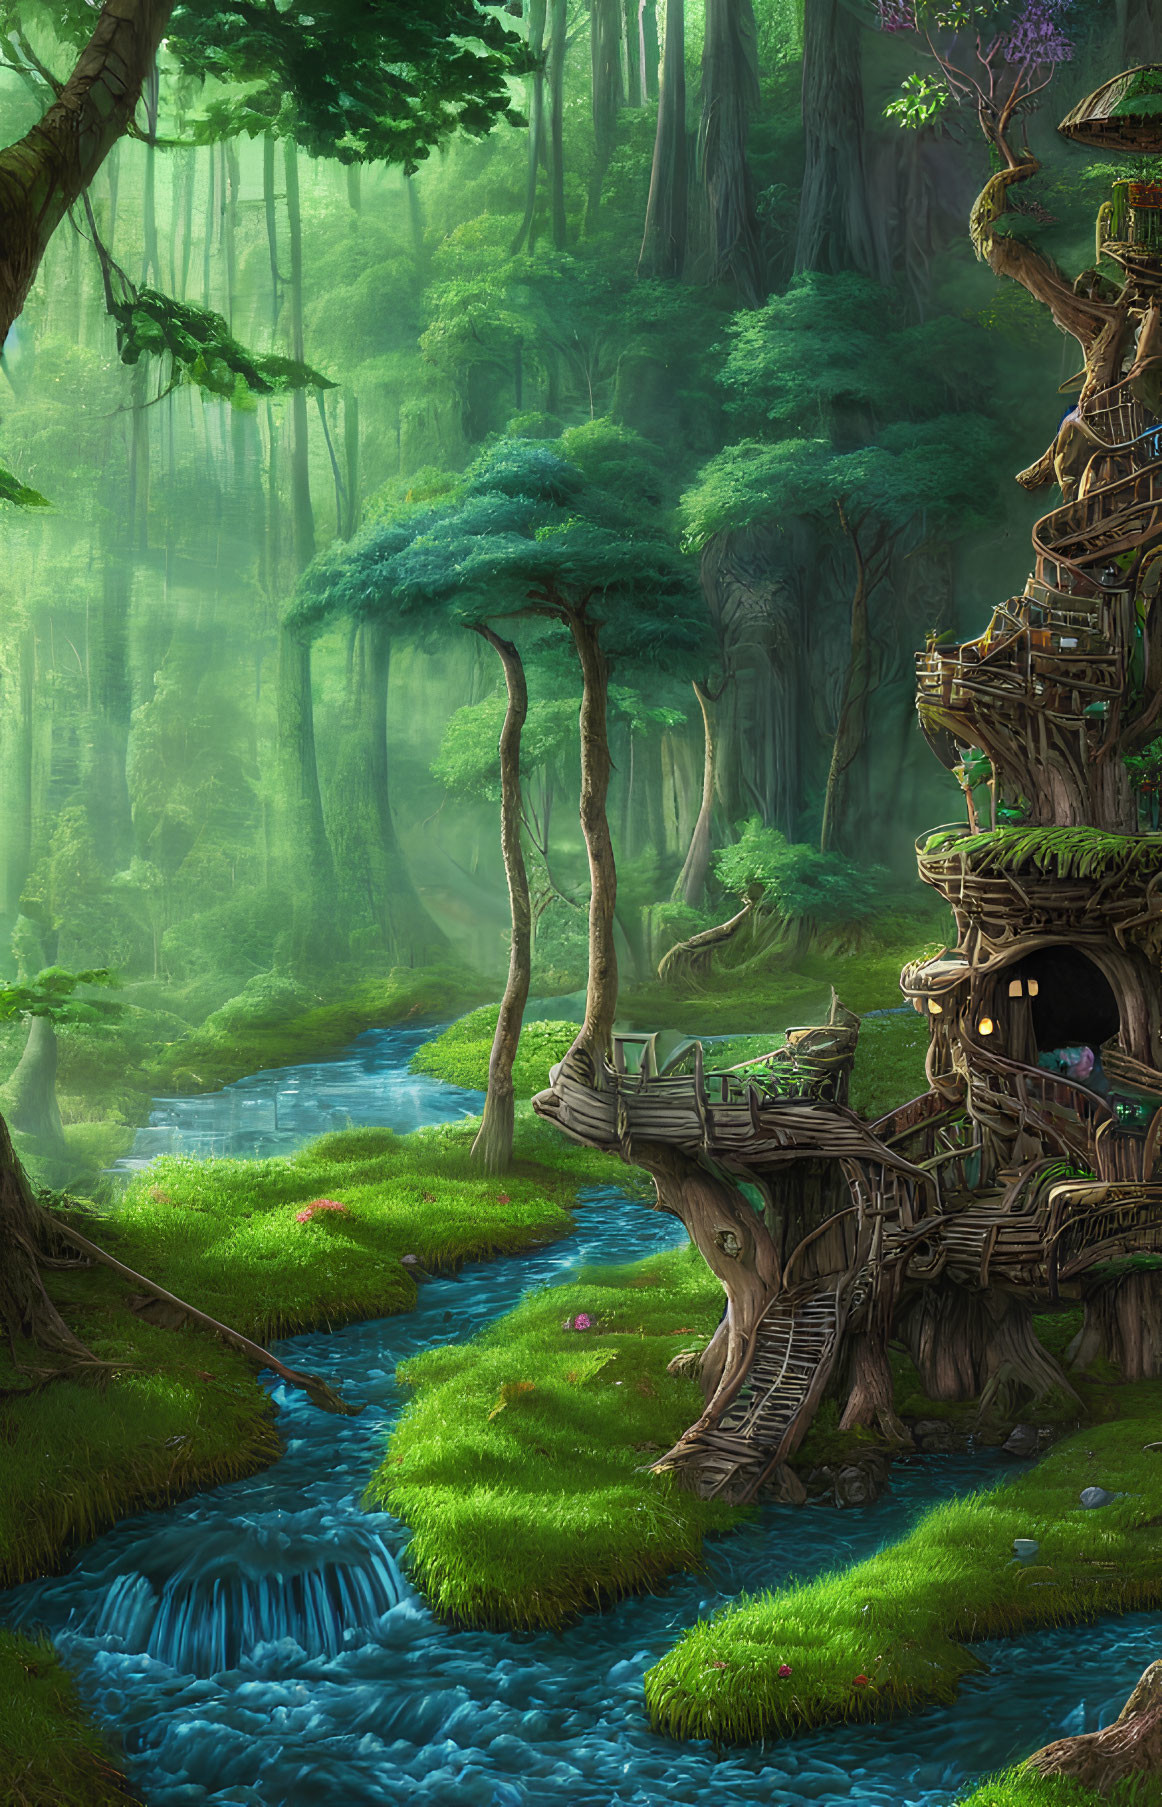 Mystical treehouse in enchanted forest near tranquil stream